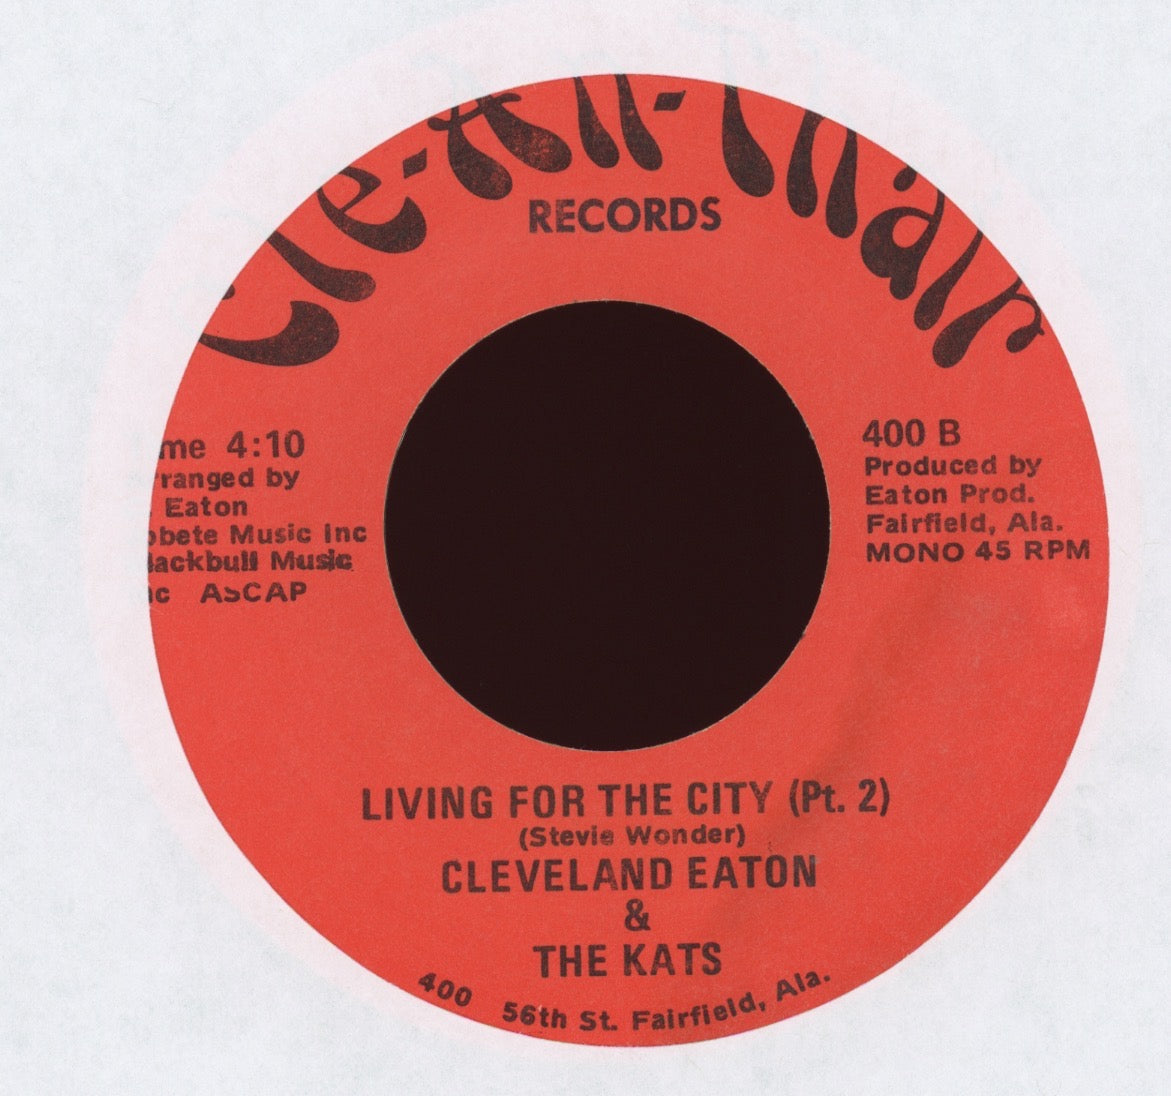 Cleveland Eaton & The Kats - Living For The City Pt1 on Cle-An-Thair Funk 45